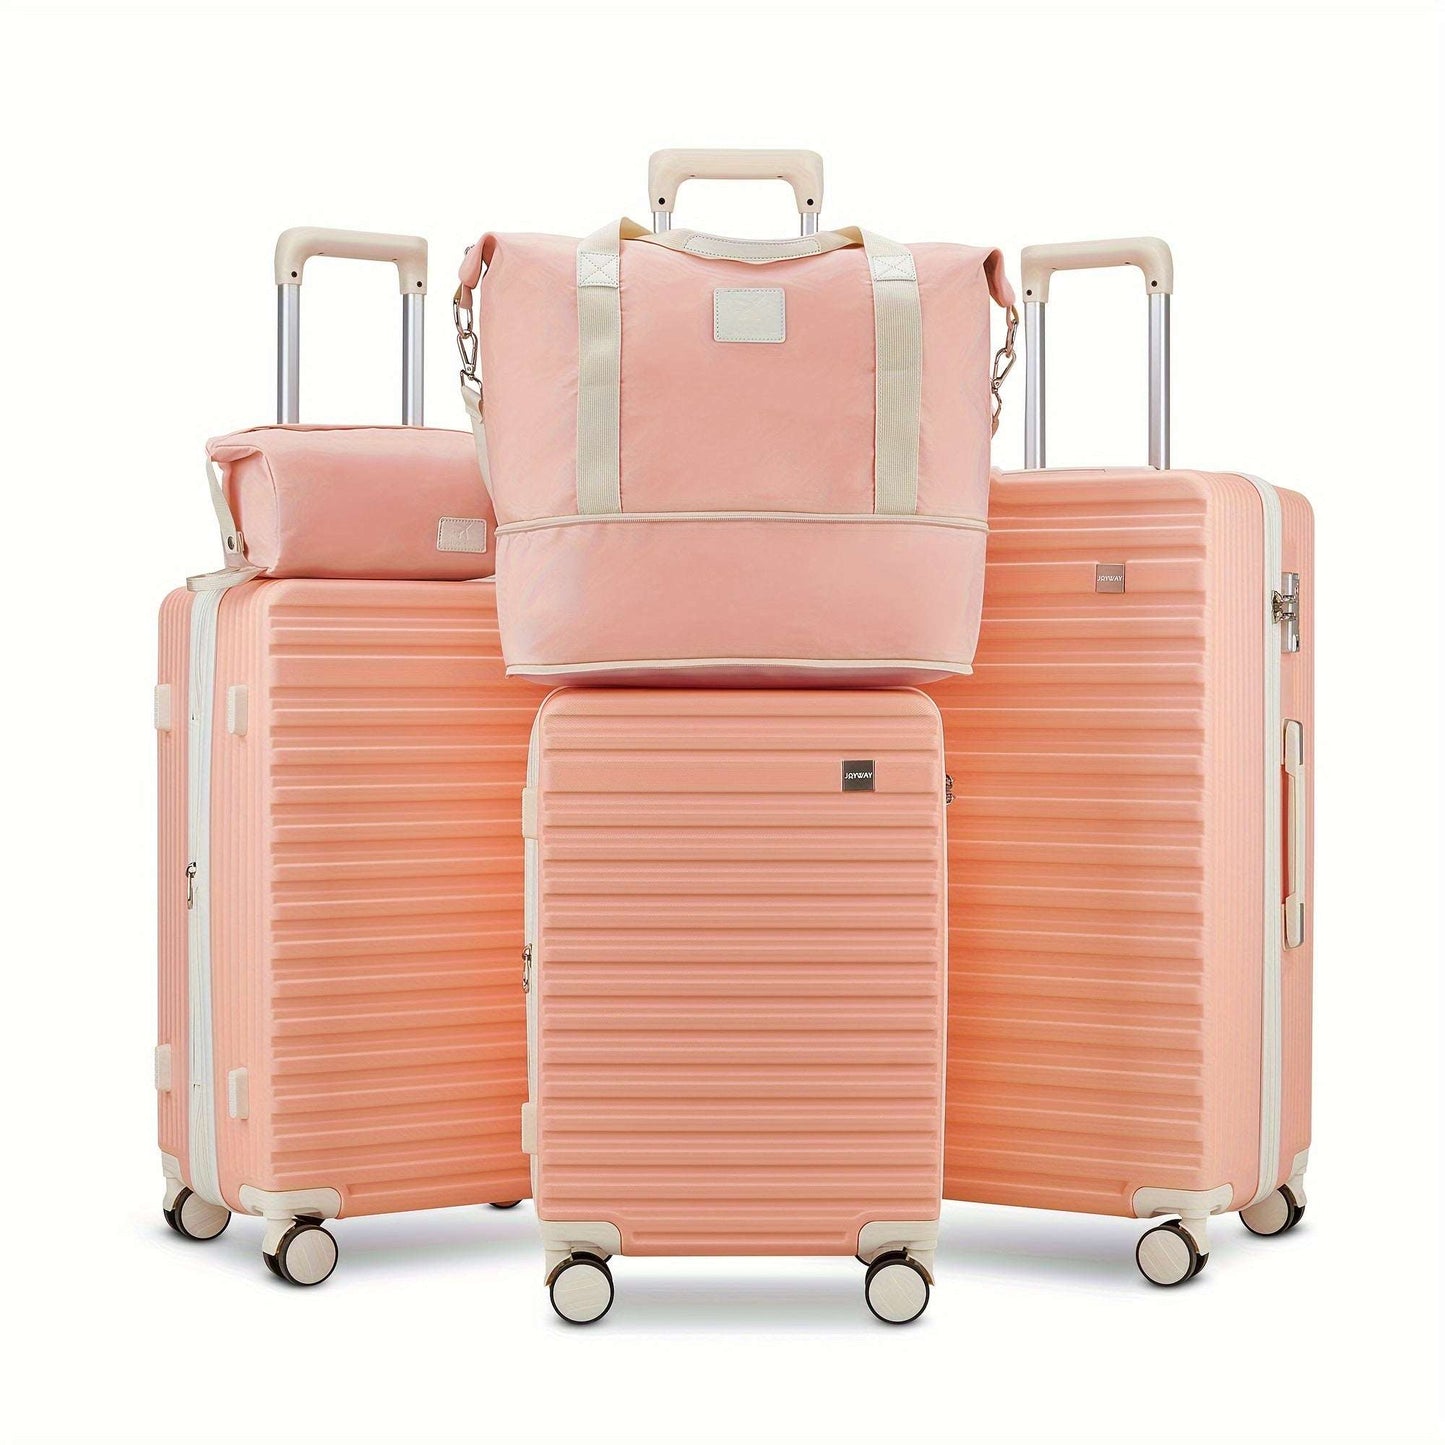 Expandable Carry-On Luggage Set - Durable Hard Shell, Lightweight, Spinner Wheels, TSA-Approved Combination Lock 94 Luggage OK•PhotoFineArt OK•PhotoFineArt